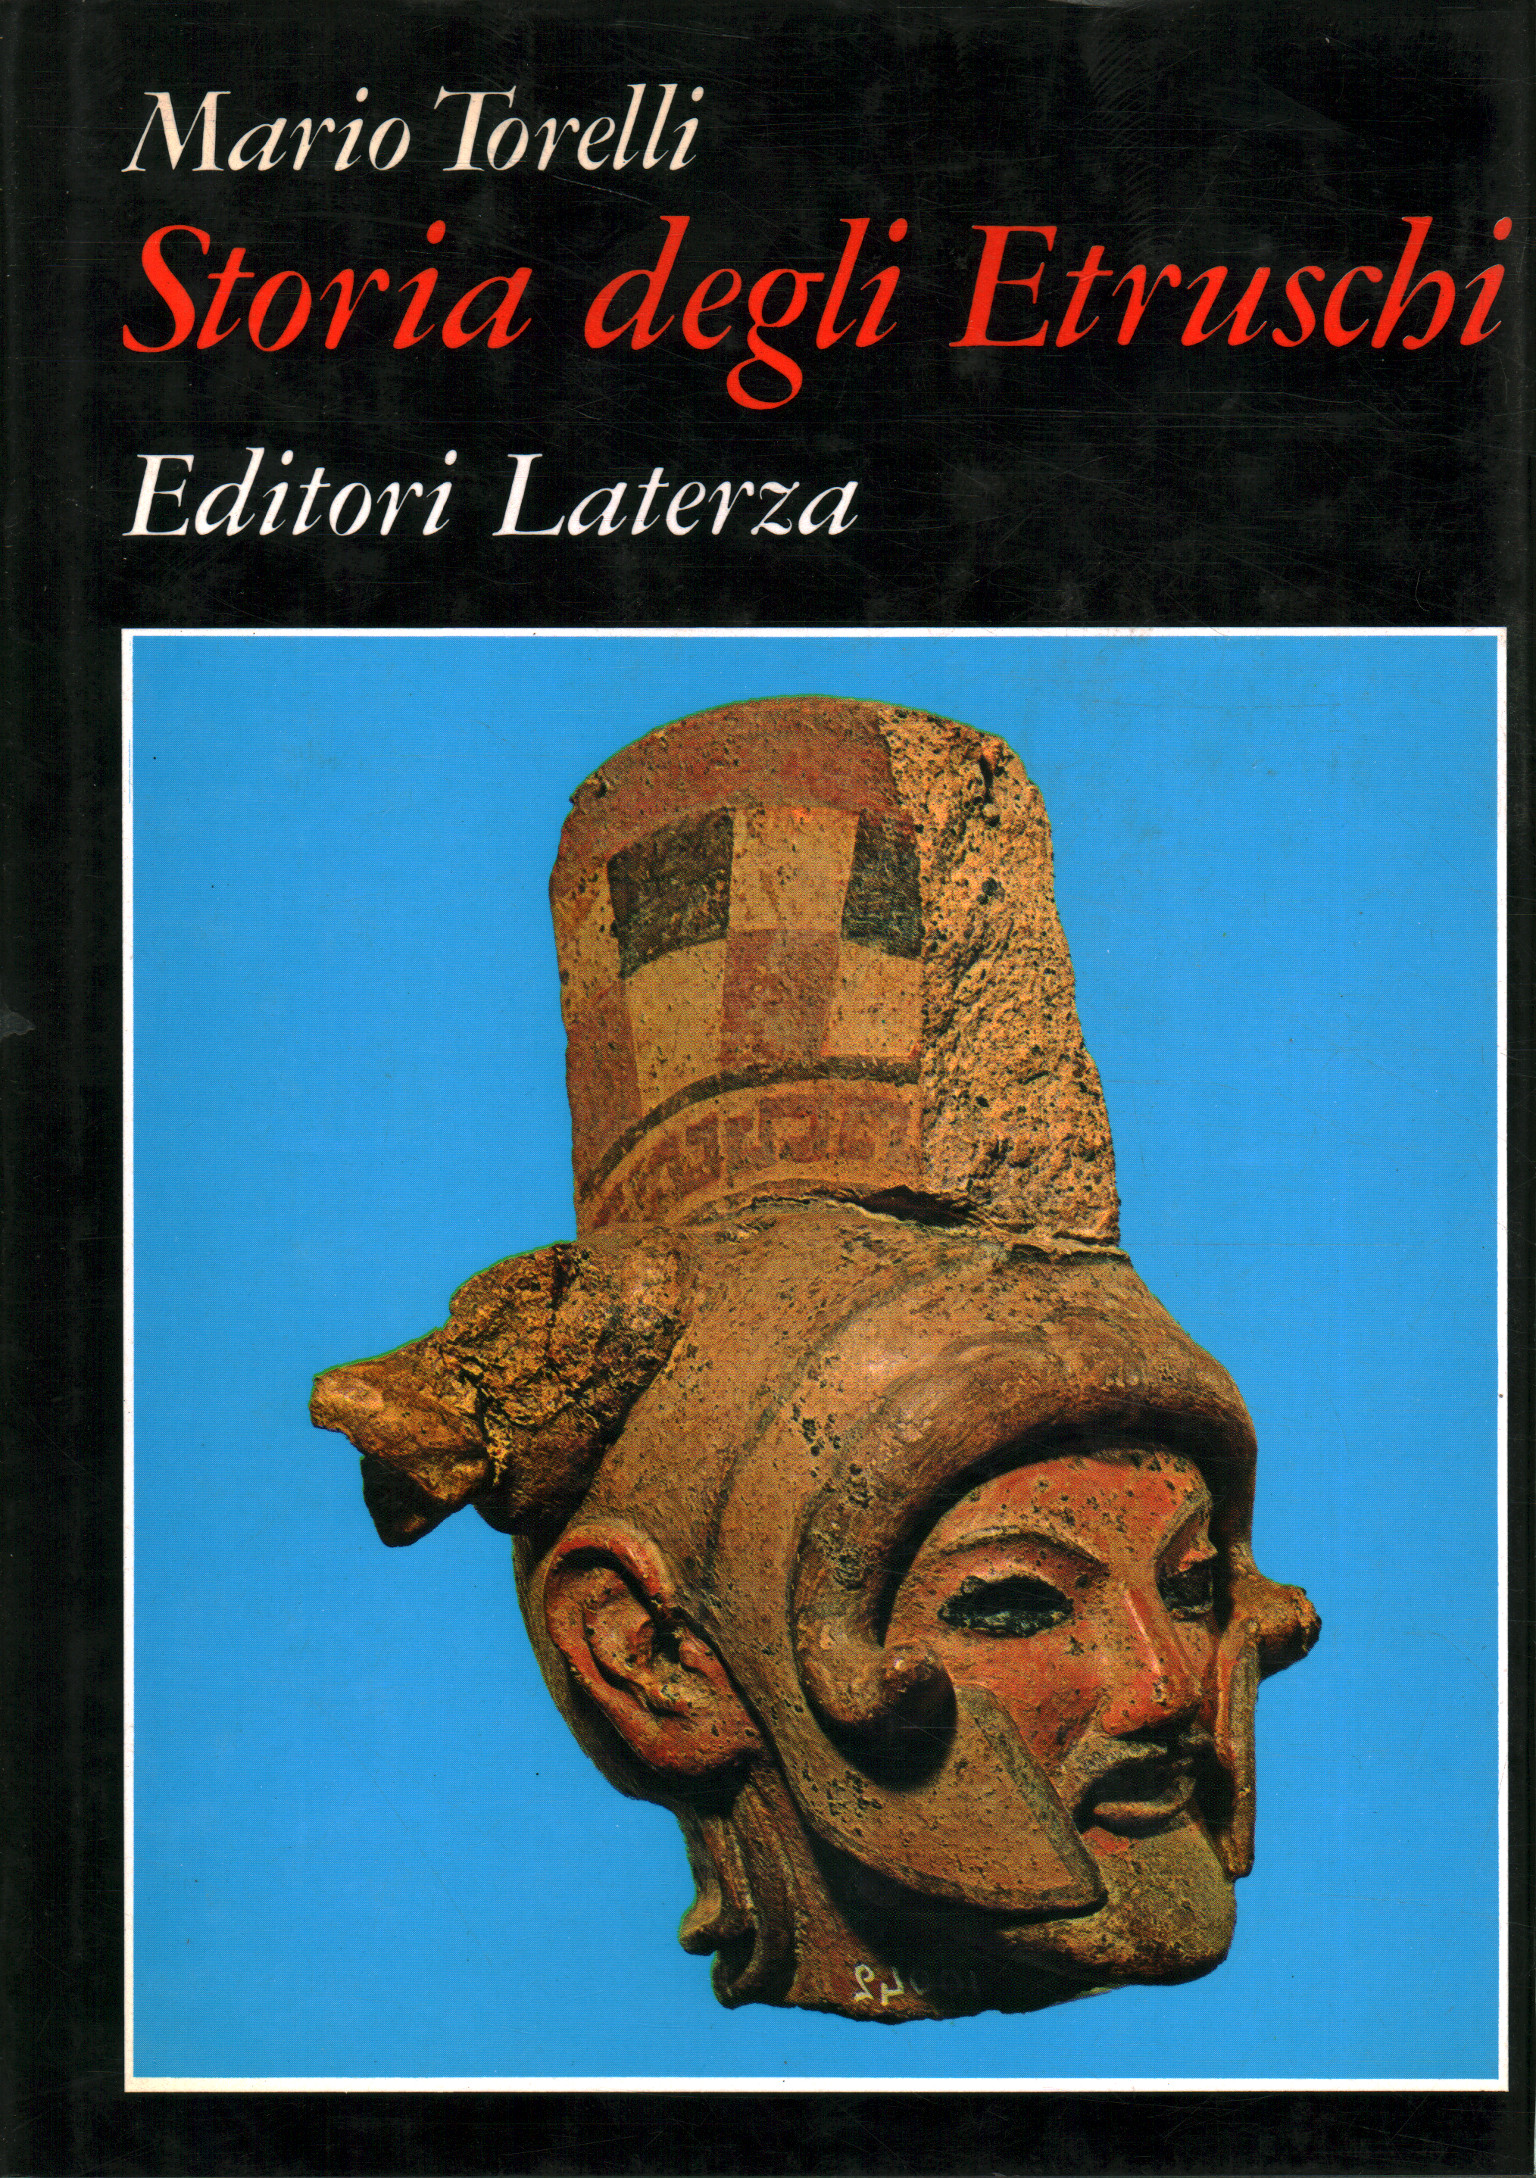 History of the Etruscans